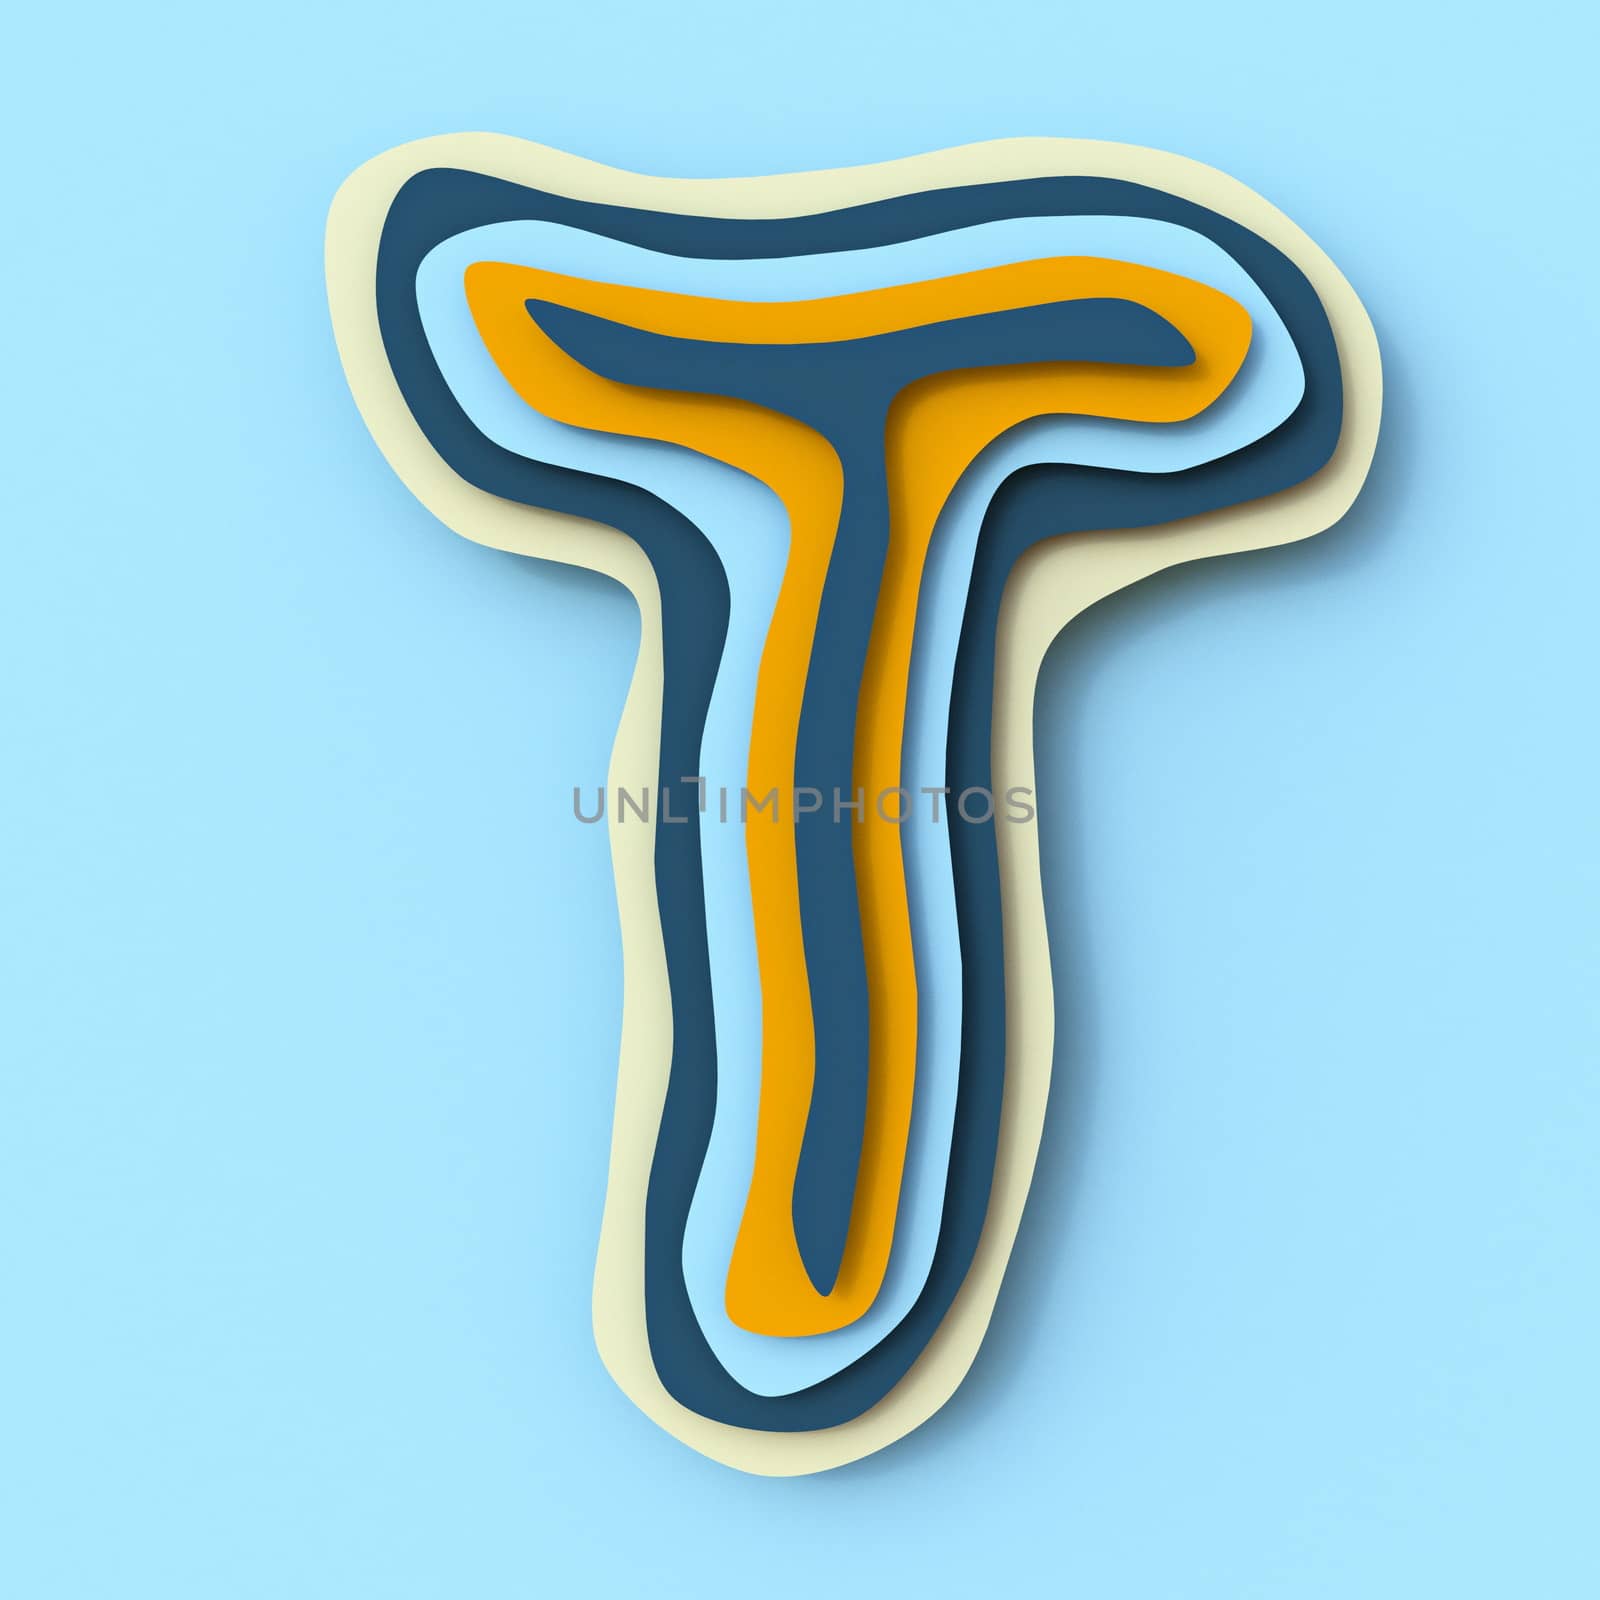 Colorful paper layers font Letter T 3D render illustration isolated on blue background